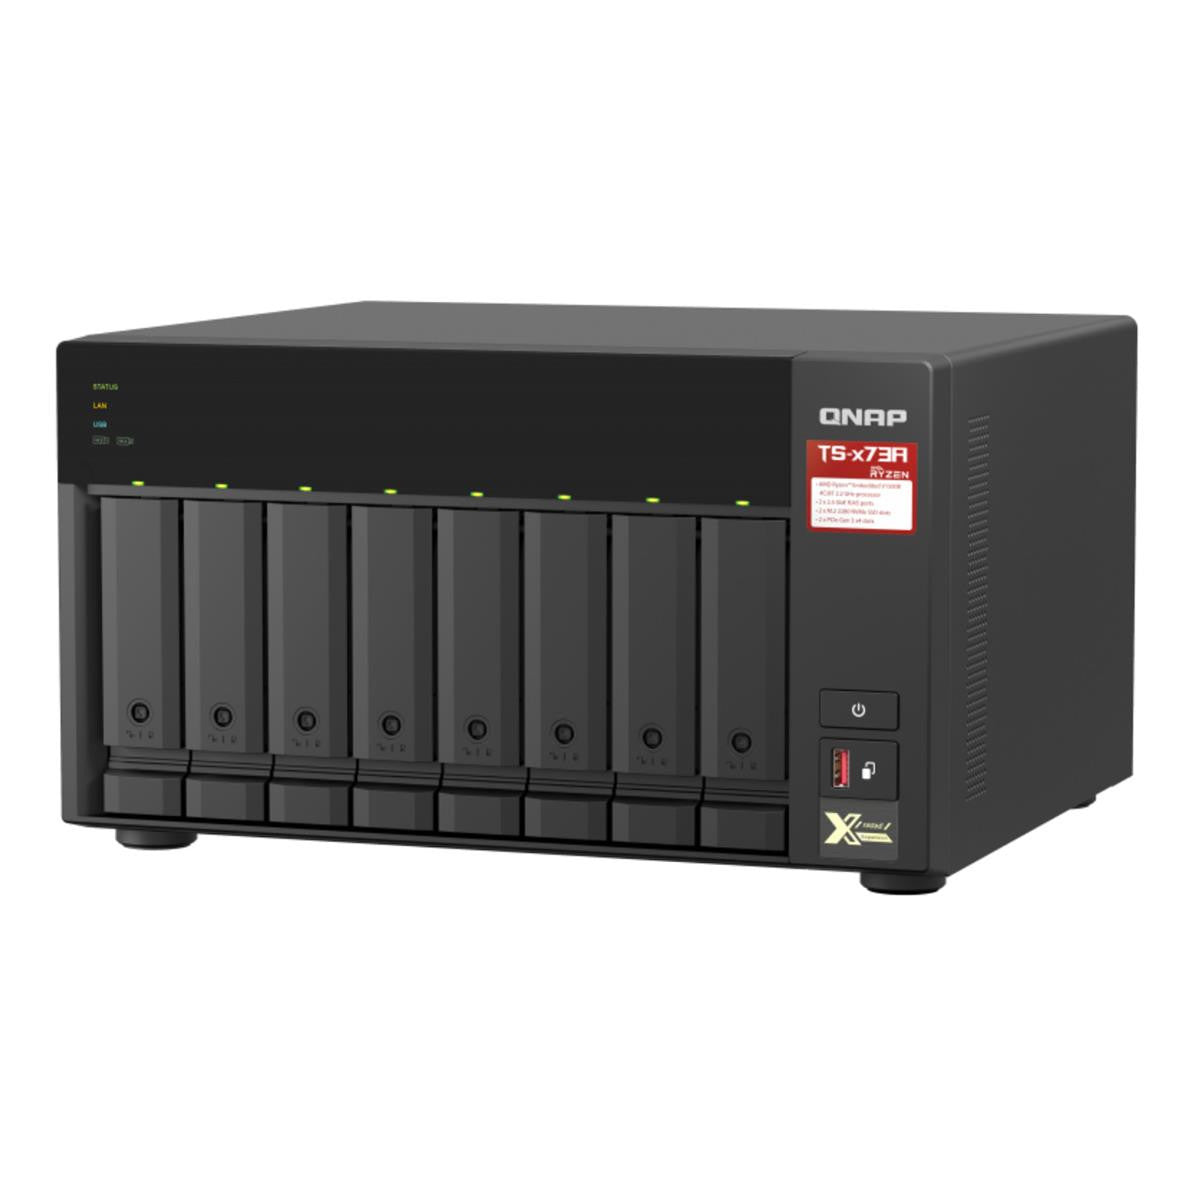 QNAP TS-873A 8-BAY NAS with 64GB DDR4 RAM and 112TB (8x14TB) Western Digital RED PLUS Drives Fully Assembled and Tested